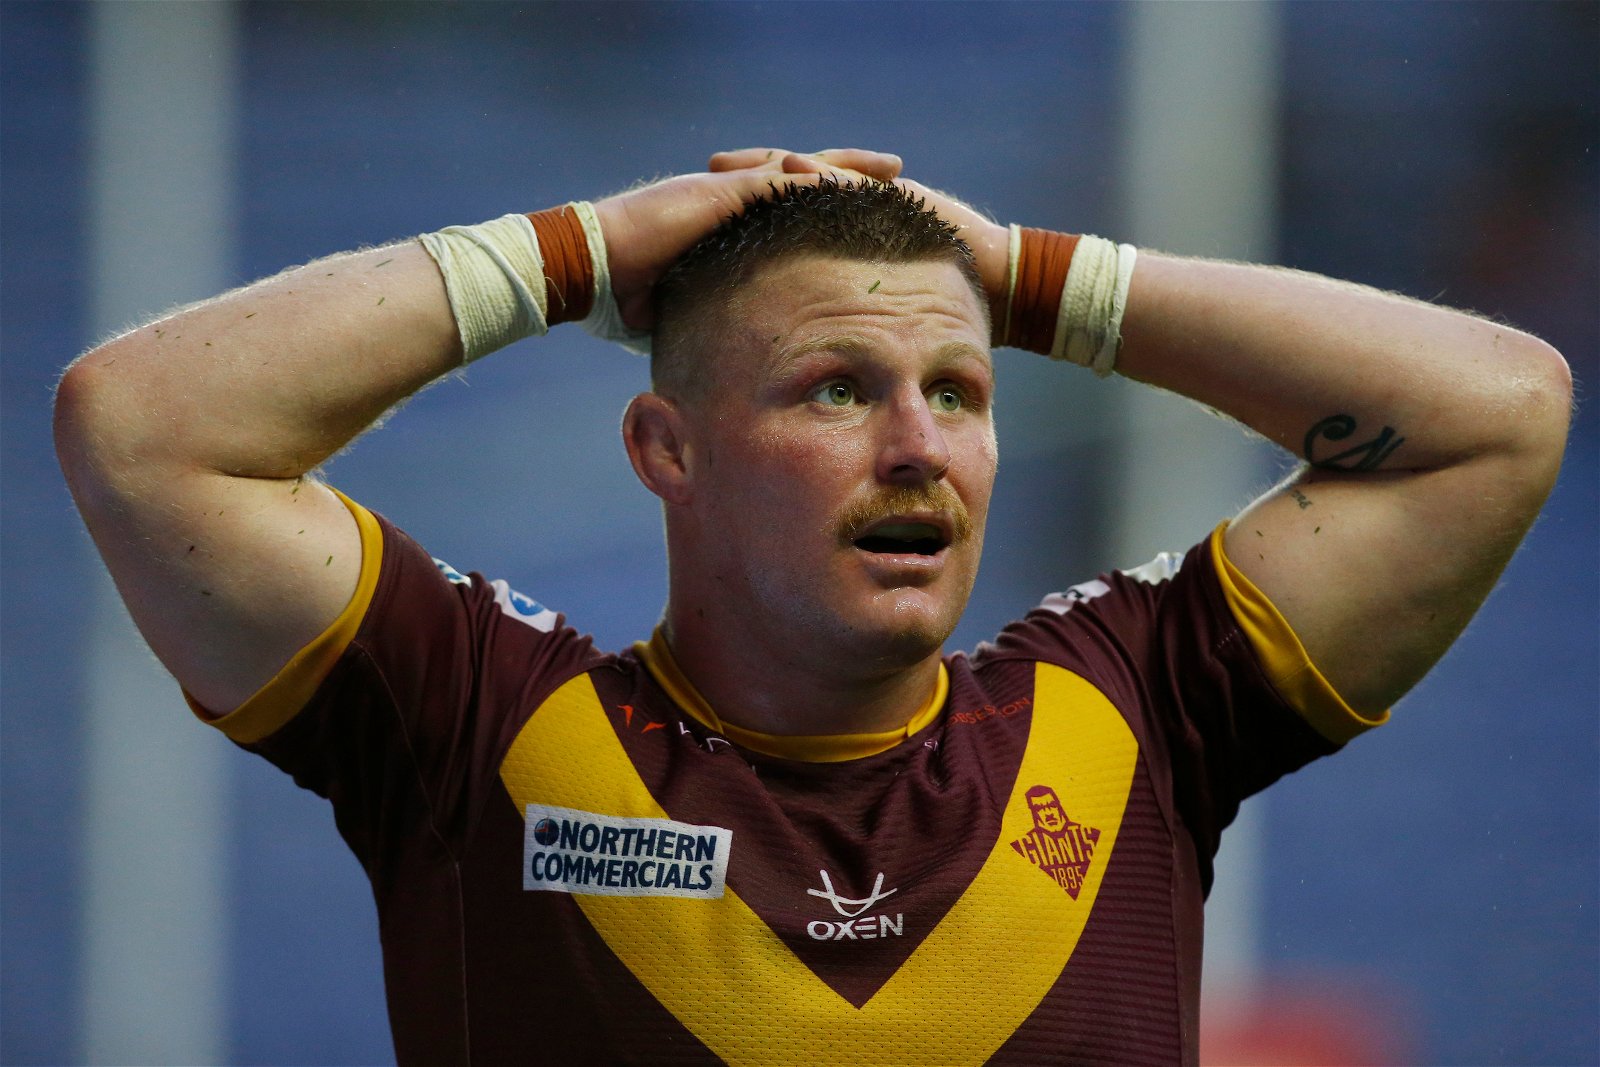 Huddersfield Giants captain Luke Yates has been hit with a three-game ban, one that assistant coach Luke Robinson has labelled an "injustice". - Super League